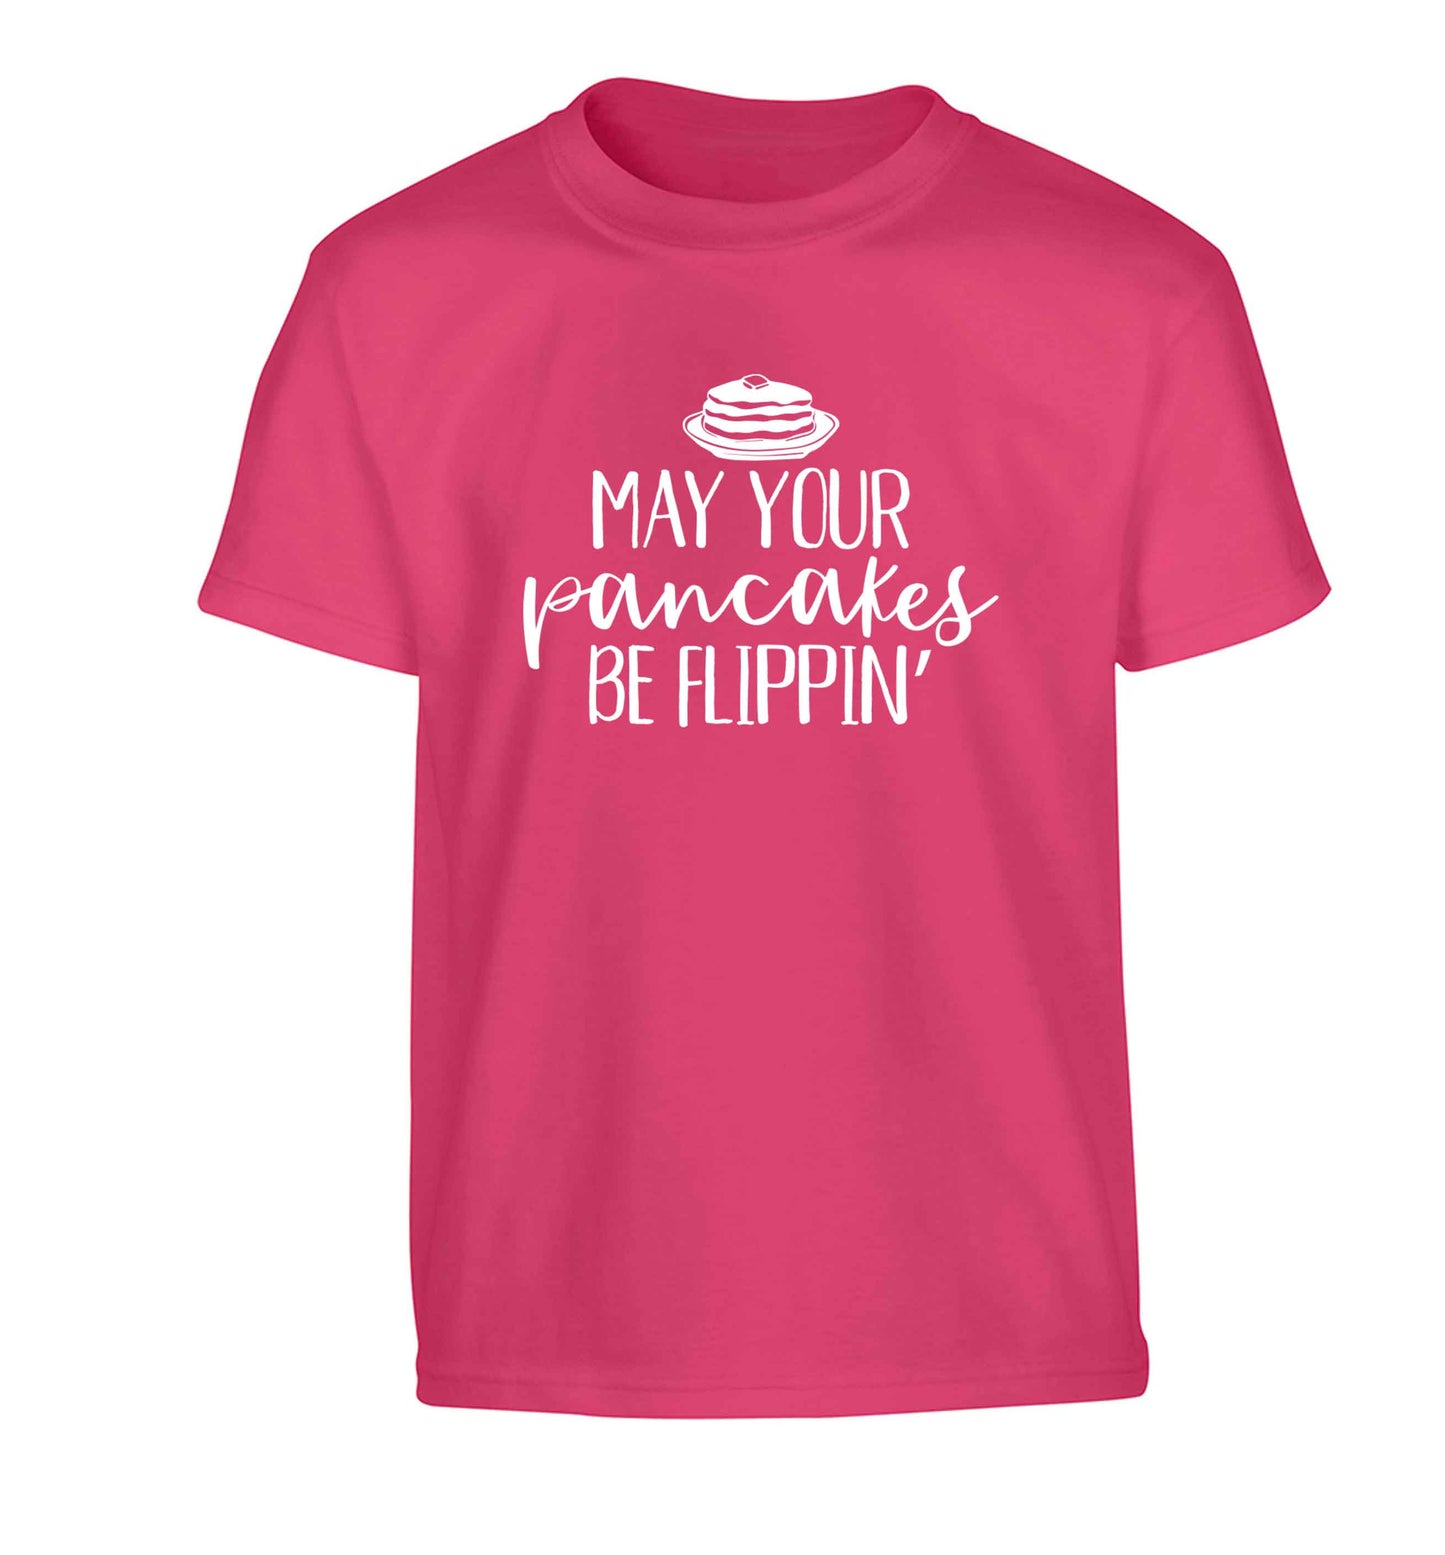 May your pancakes be flippin' Children's pink Tshirt 12-13 Years